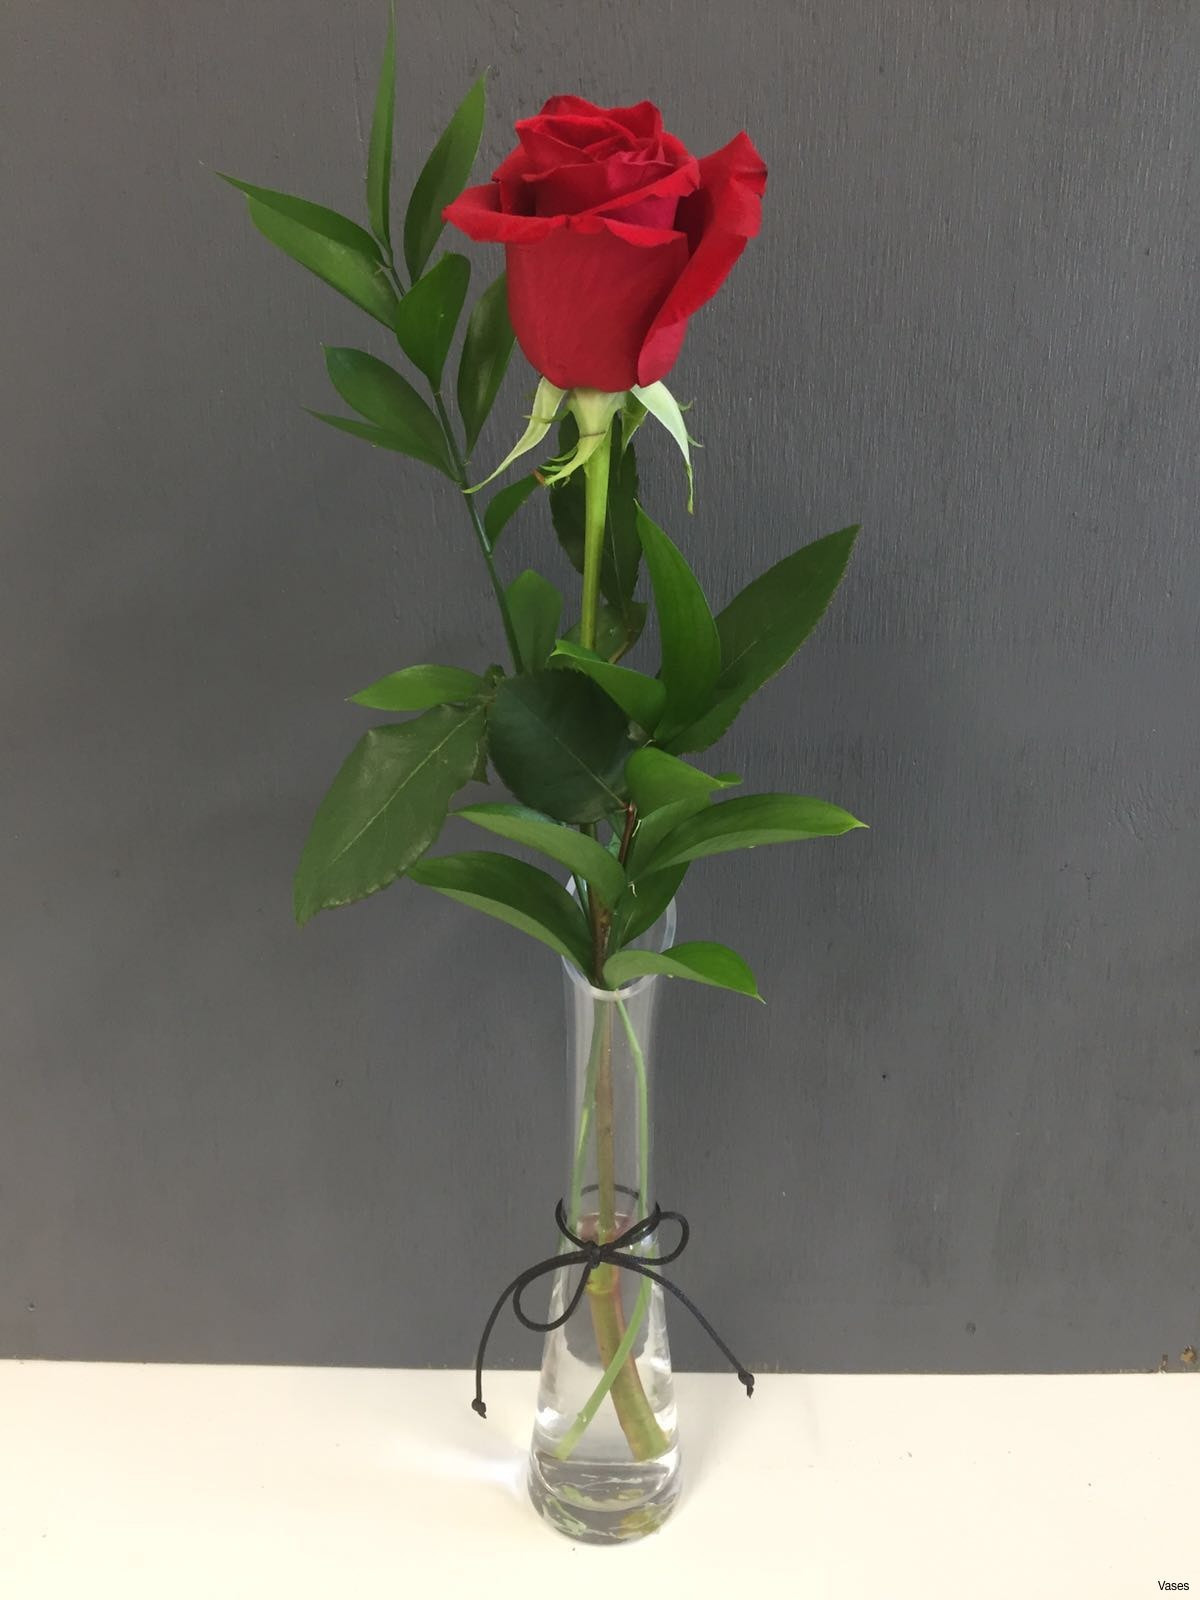 Chinese Vase Umbrella Stand Of Single Flower Vase Photos Flowers In A Vase New Beautiful Single Intended for Single Flower Vase Images Roses Red In A Vase Singleh Vases Rose Single I 0d Invasive